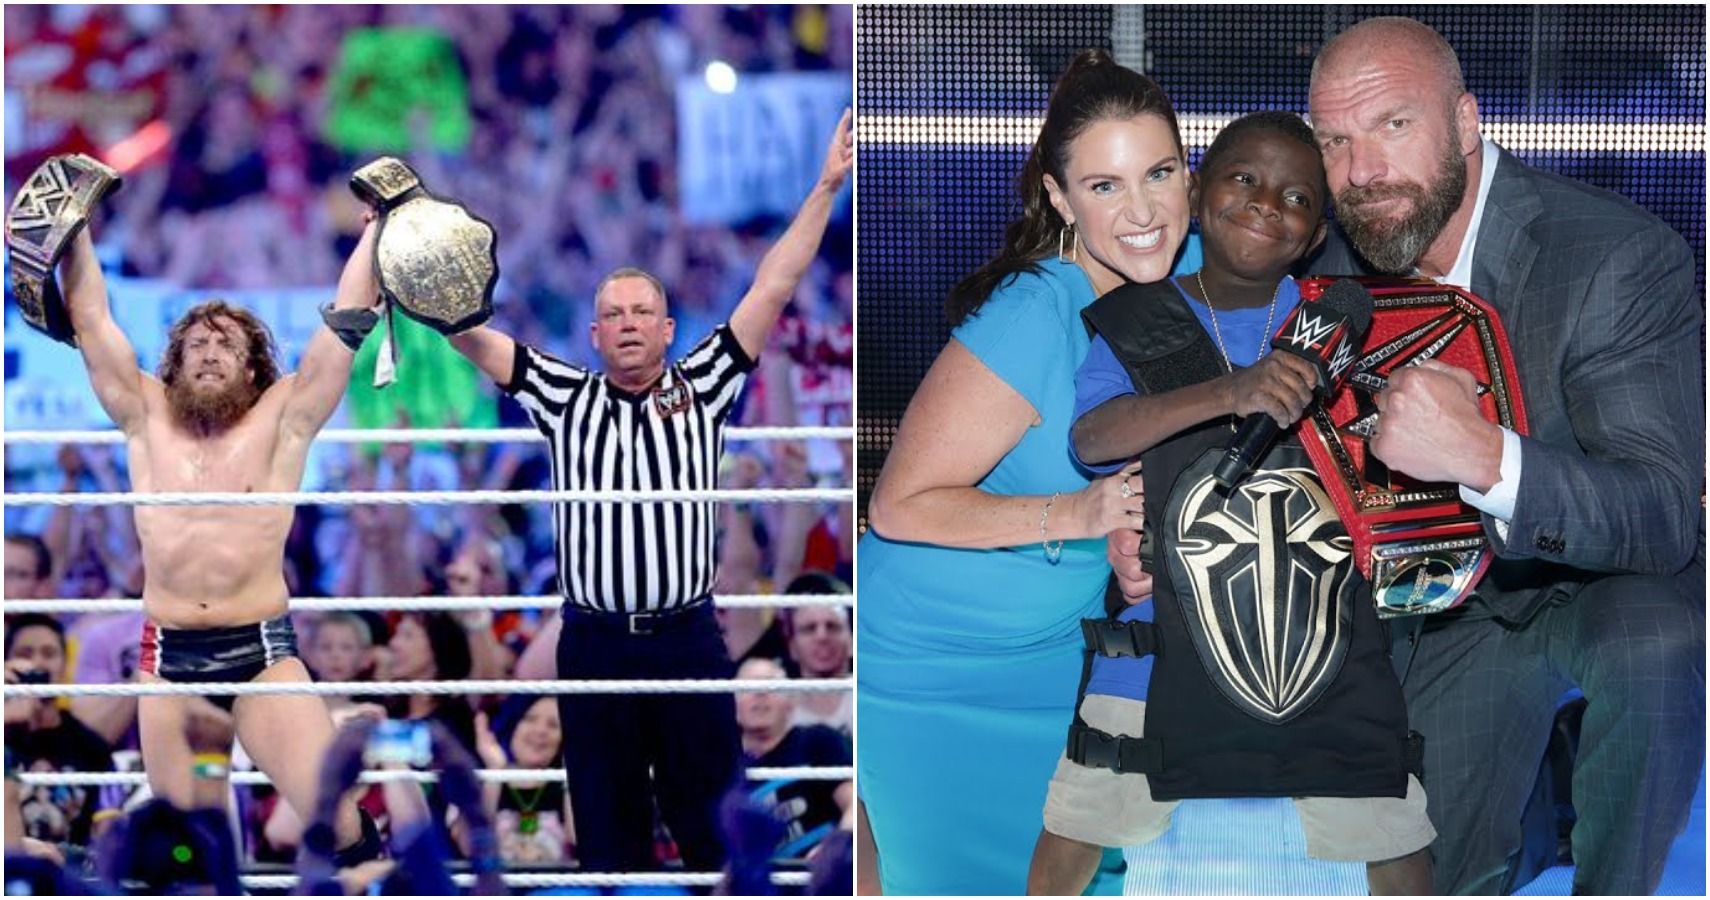 Daniel Bryan wins championships and Steph McMahon, Jarrius Robertson, and Triple H posing for picture